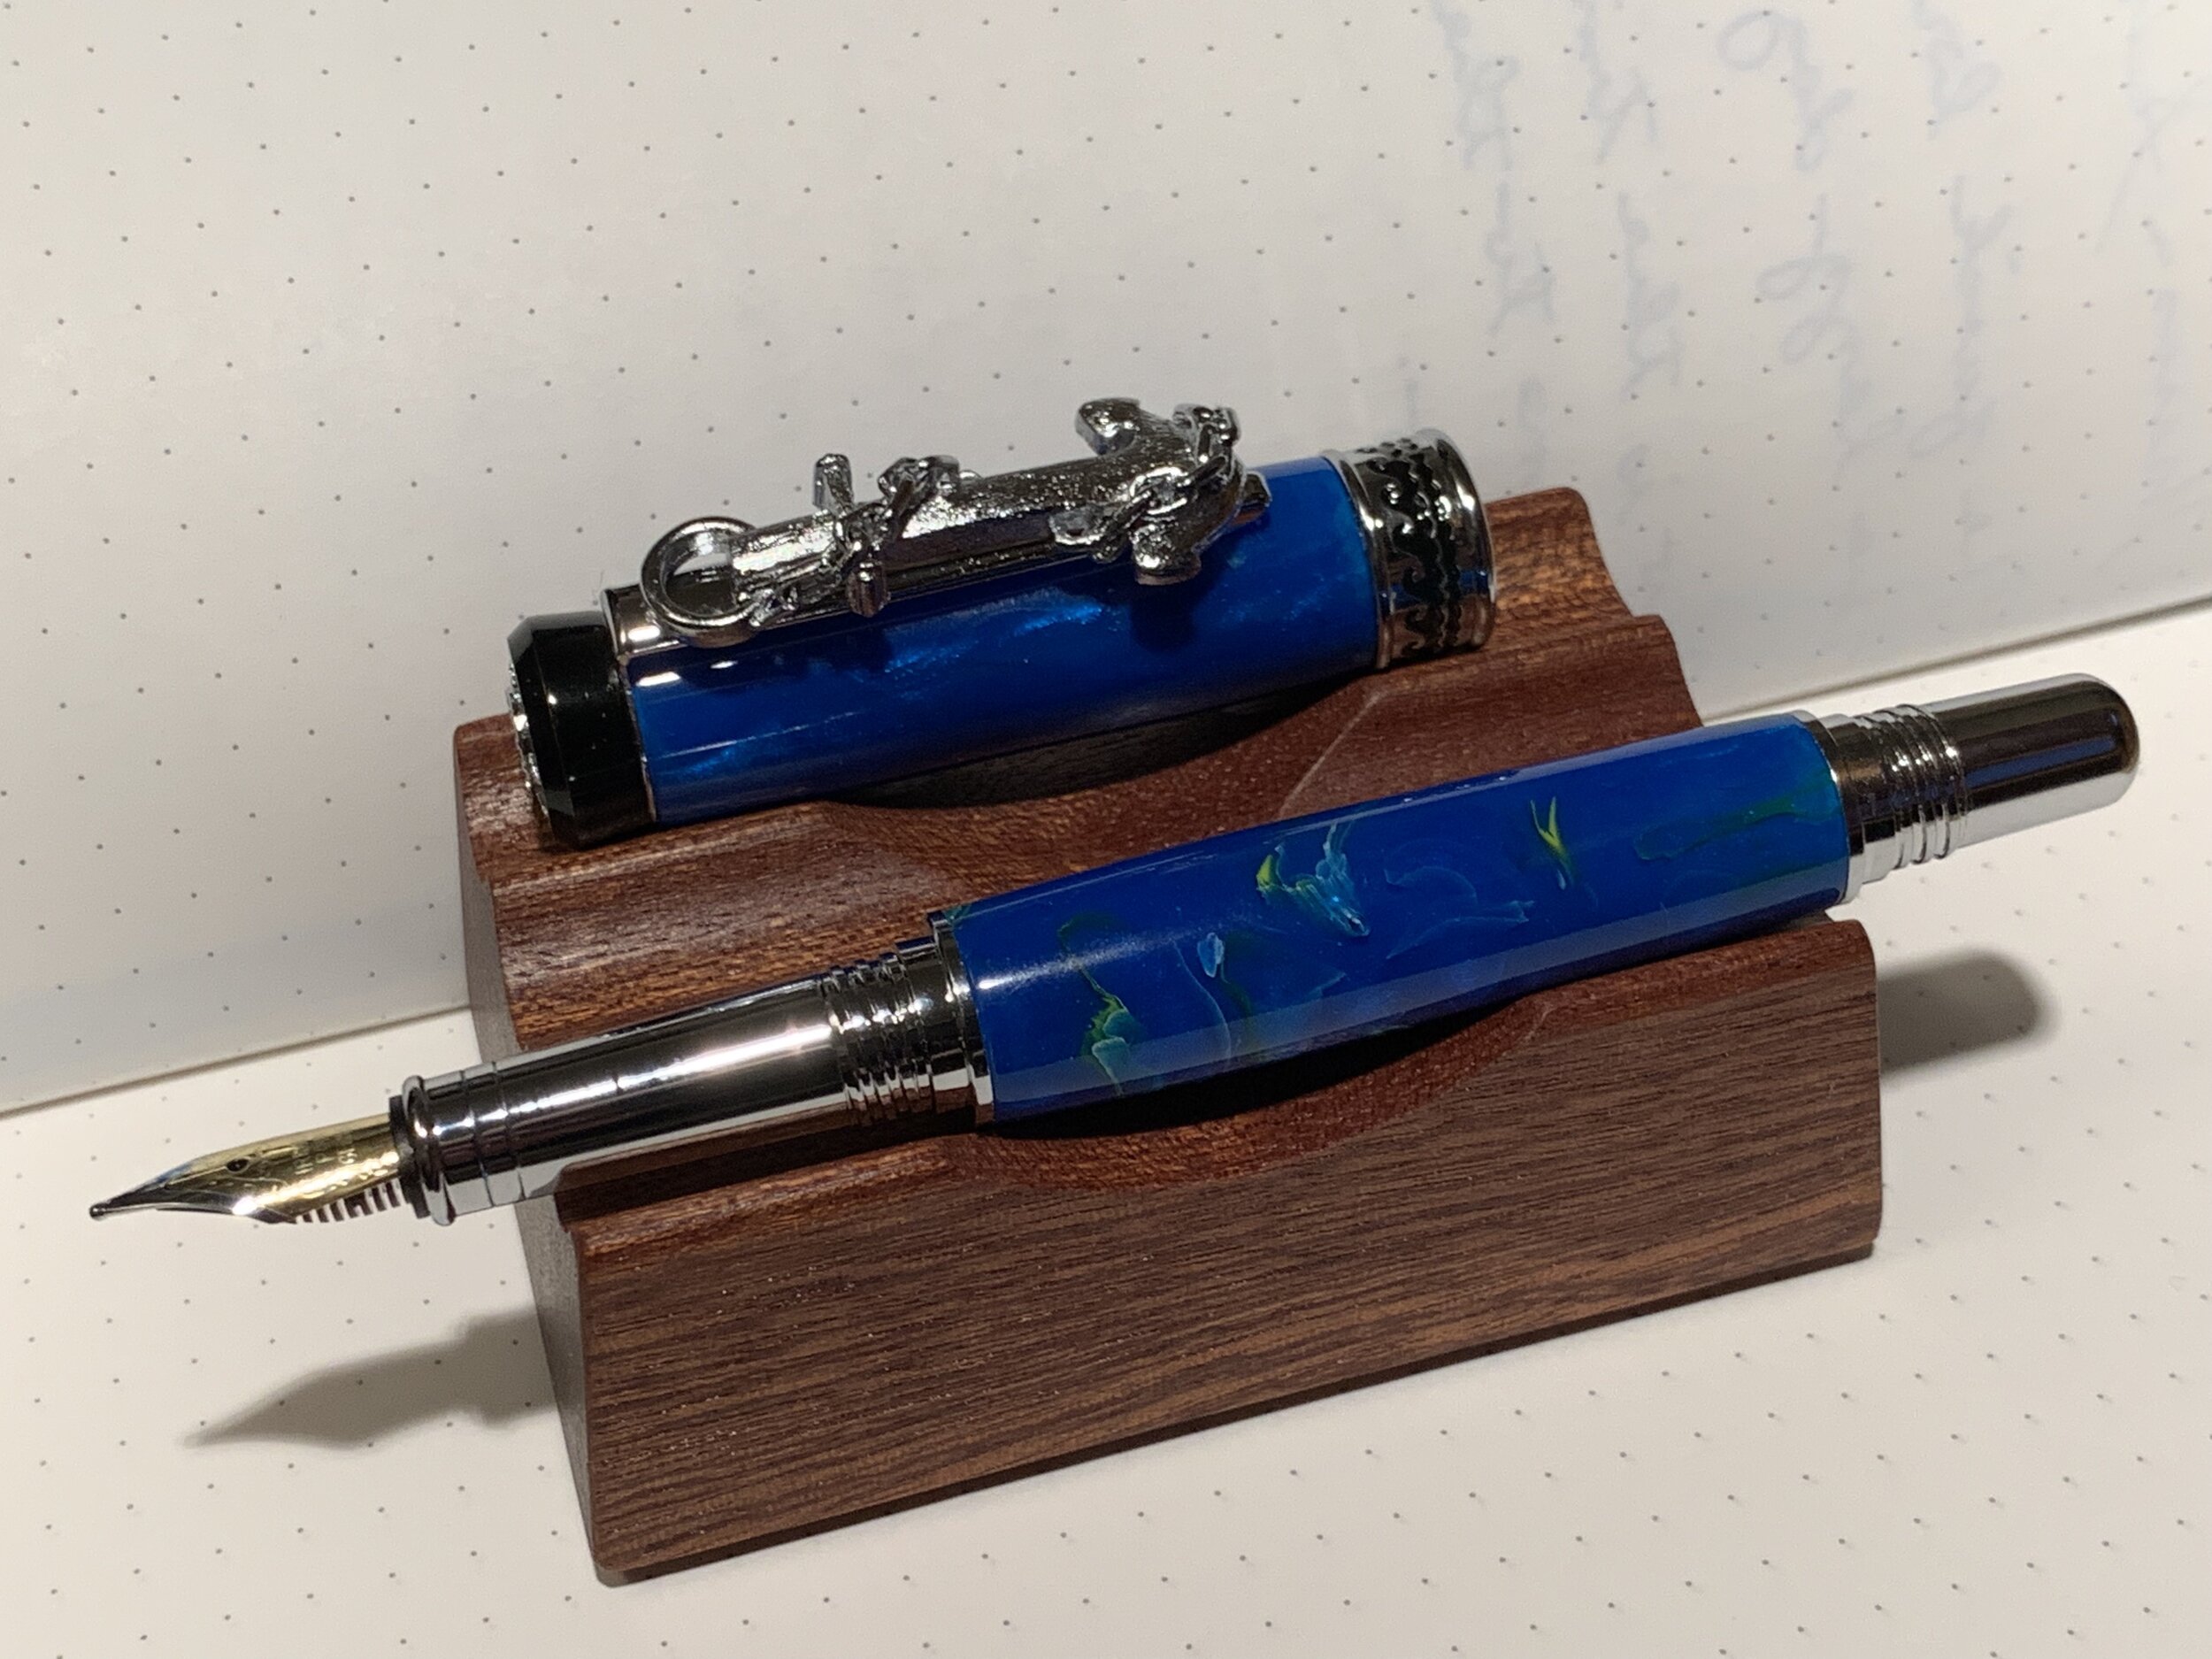 Voyager Fountain Pen - $60 - SOLD